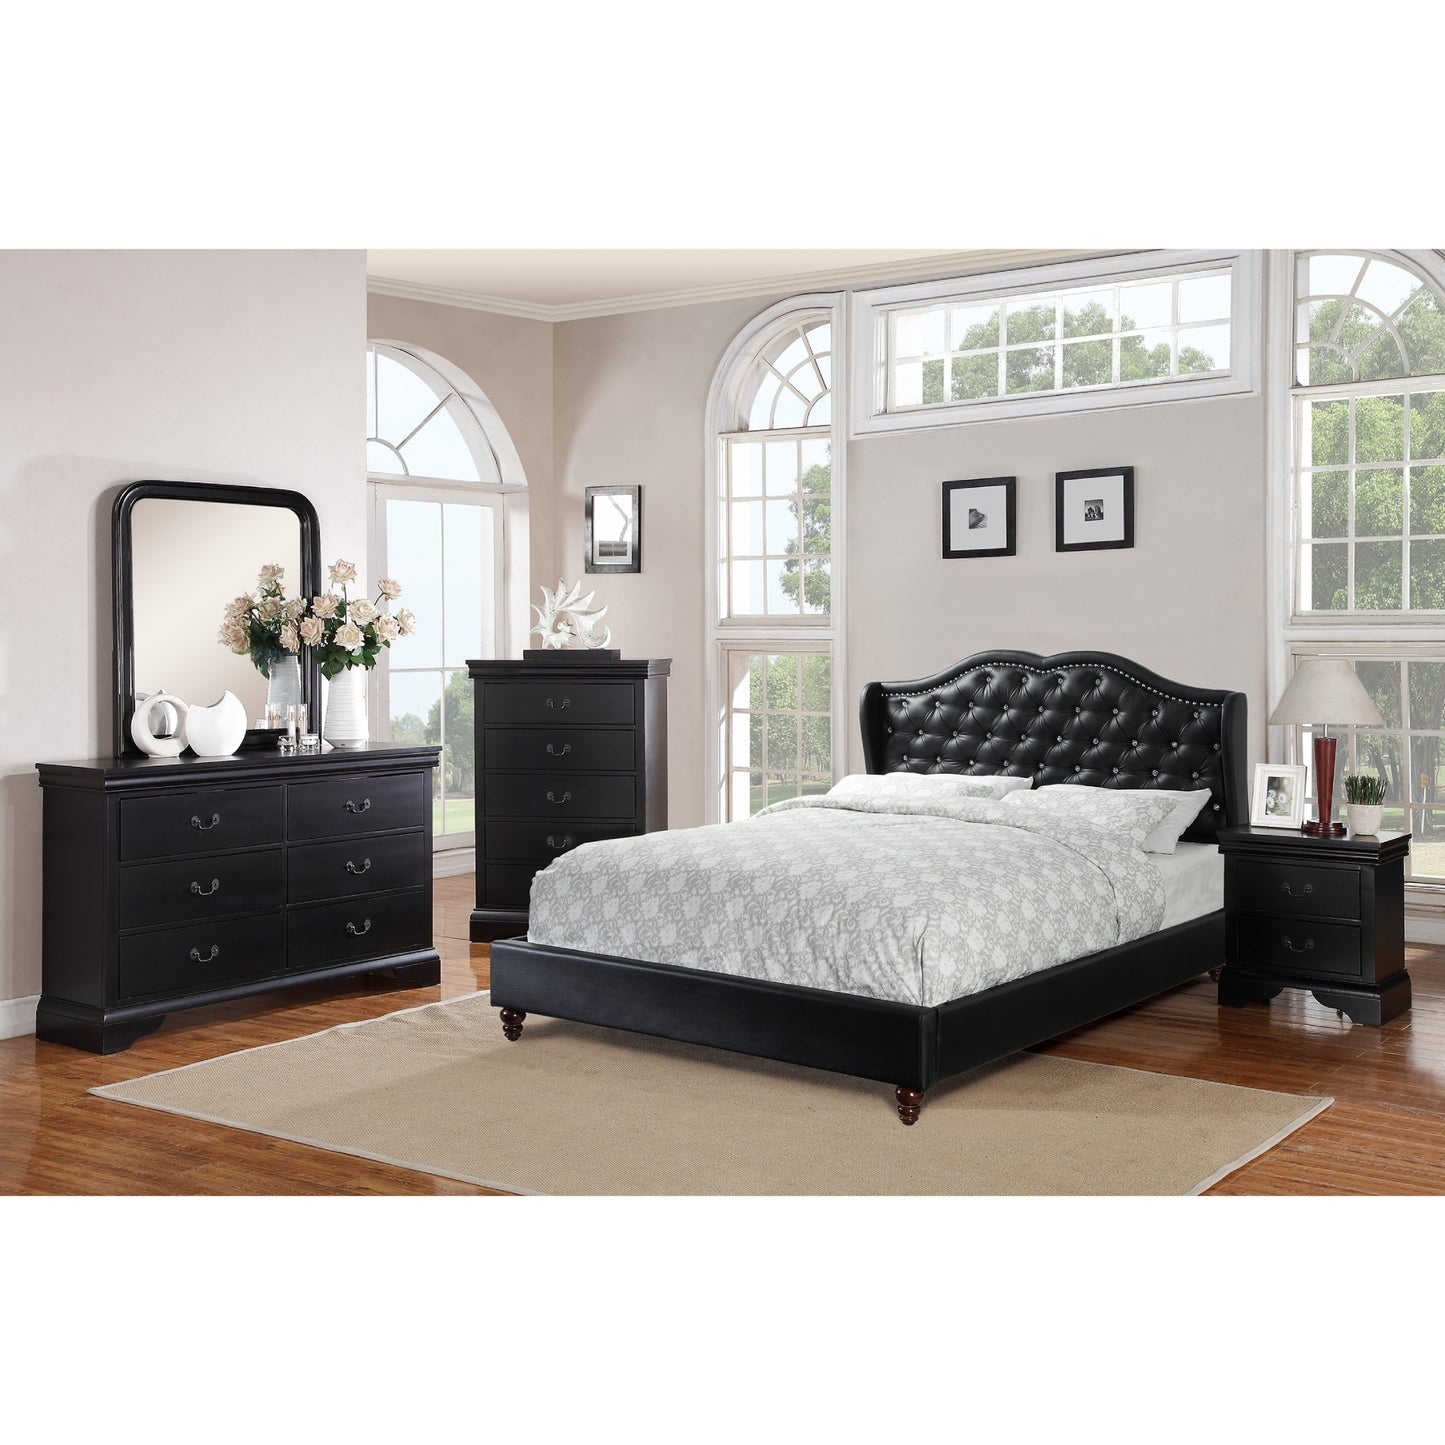 Queen Bed Set Black Faux Leather Upholstered Wingback Design